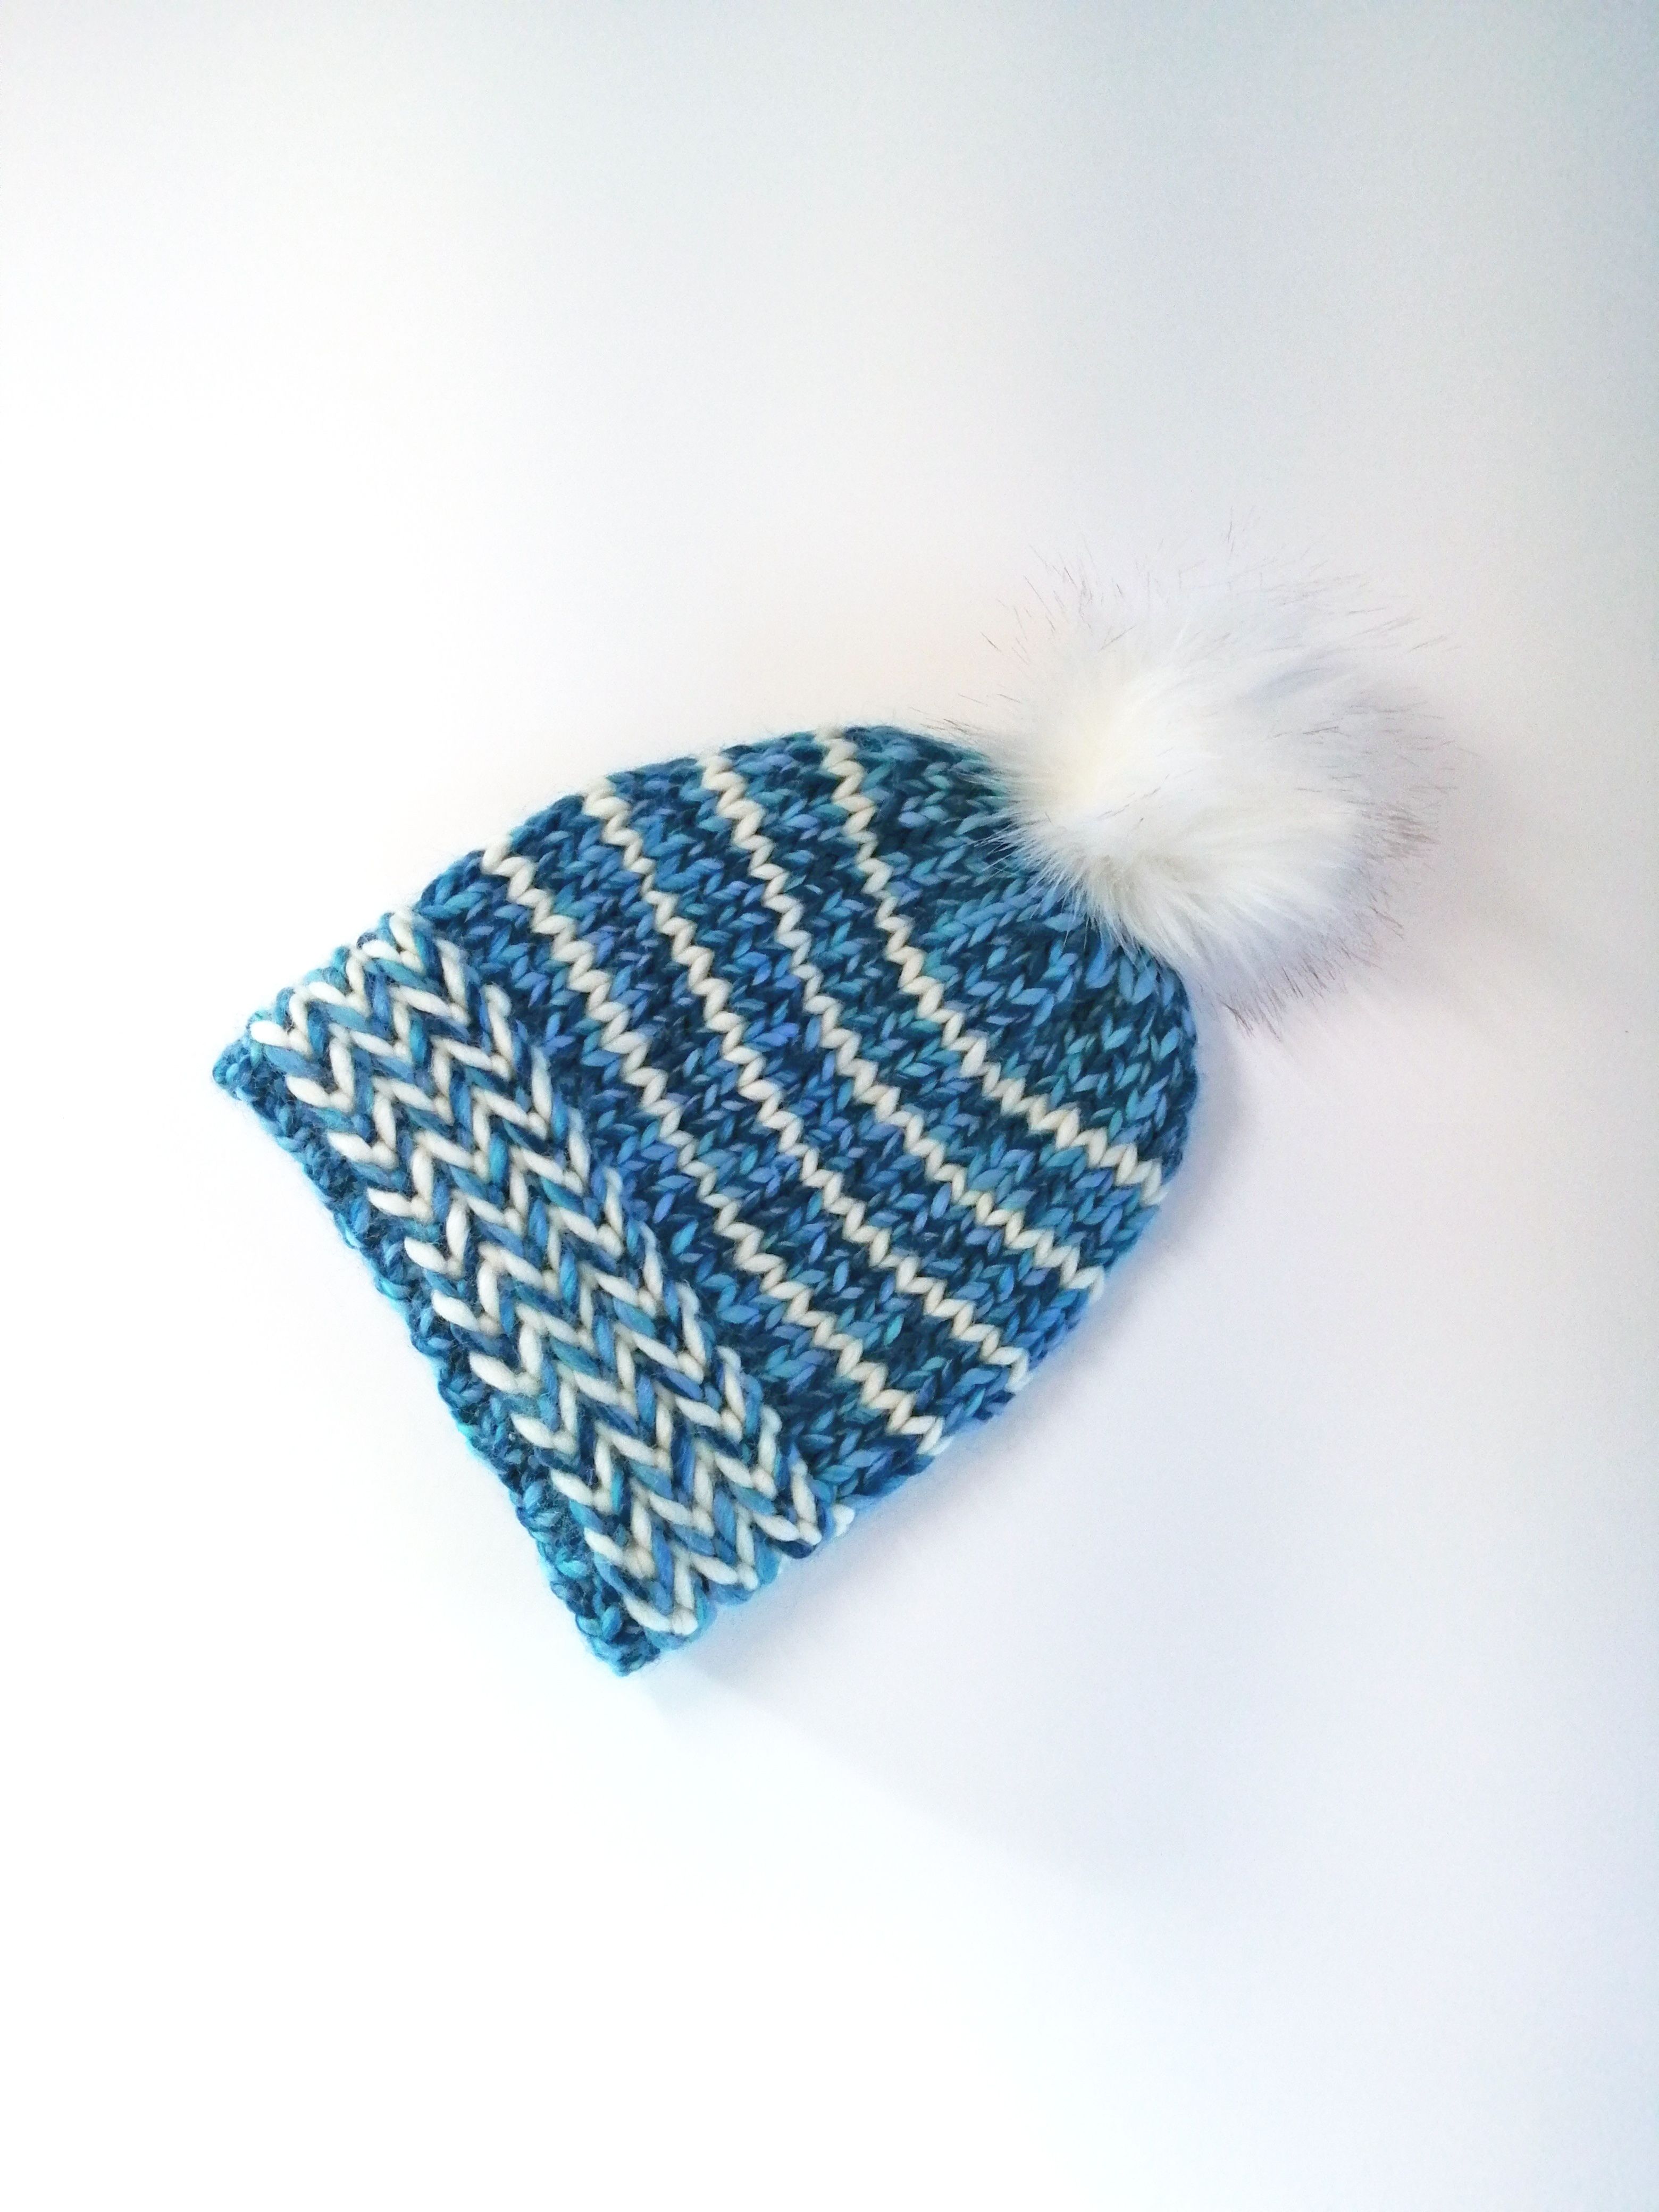 Blue merino wool beanie / hat hand knit in super chunky yarn with faux fur white pom (optional). Adult sized